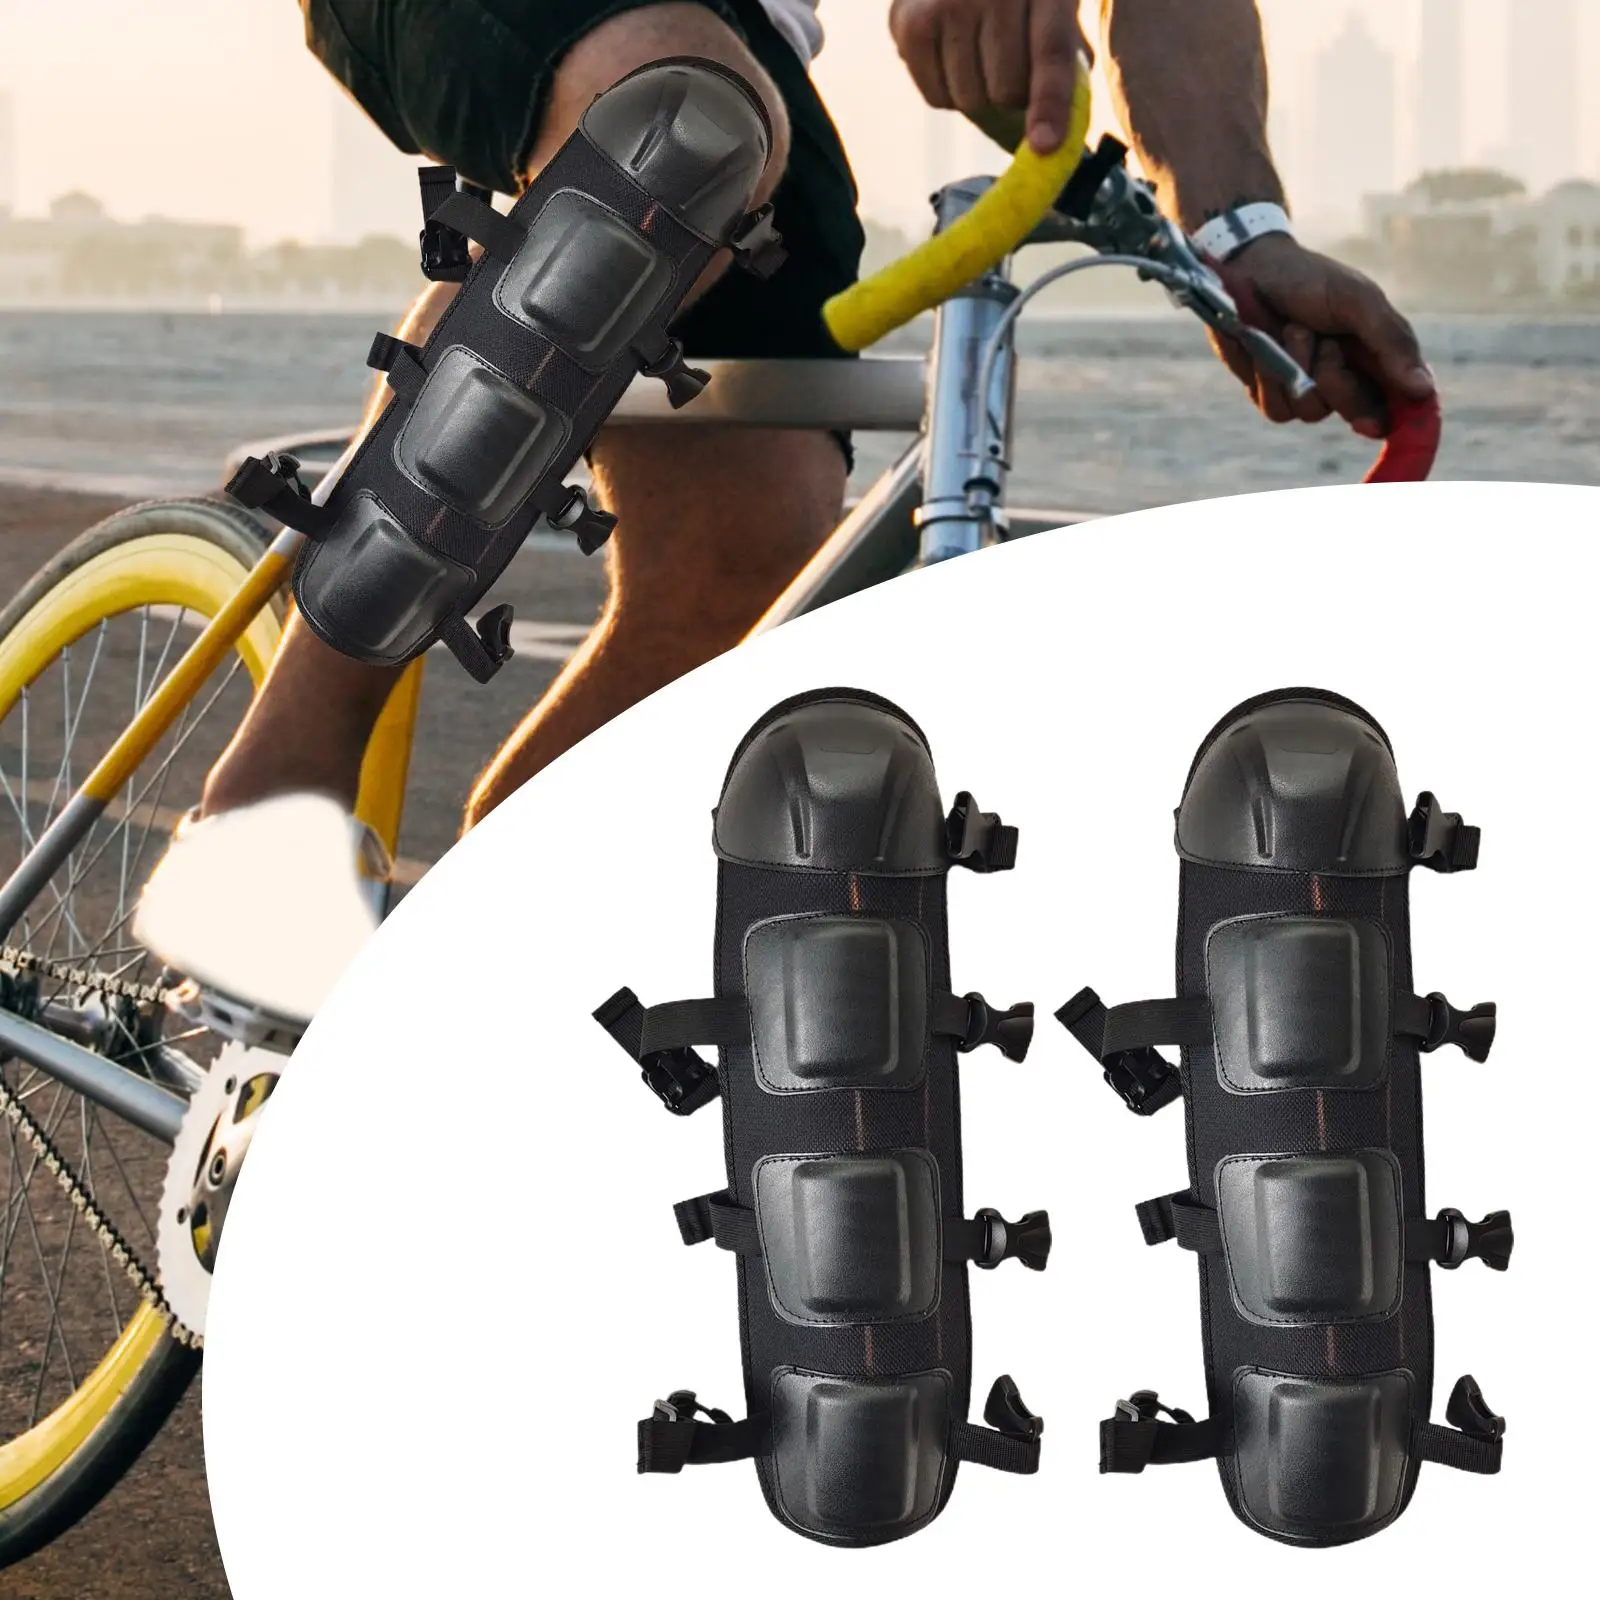 Work Knee Pads Kneelet Protective Gear Protector Pad Soft Motorcycle Knee Shin Guards for Riding Scooter Garden Ski Equipment